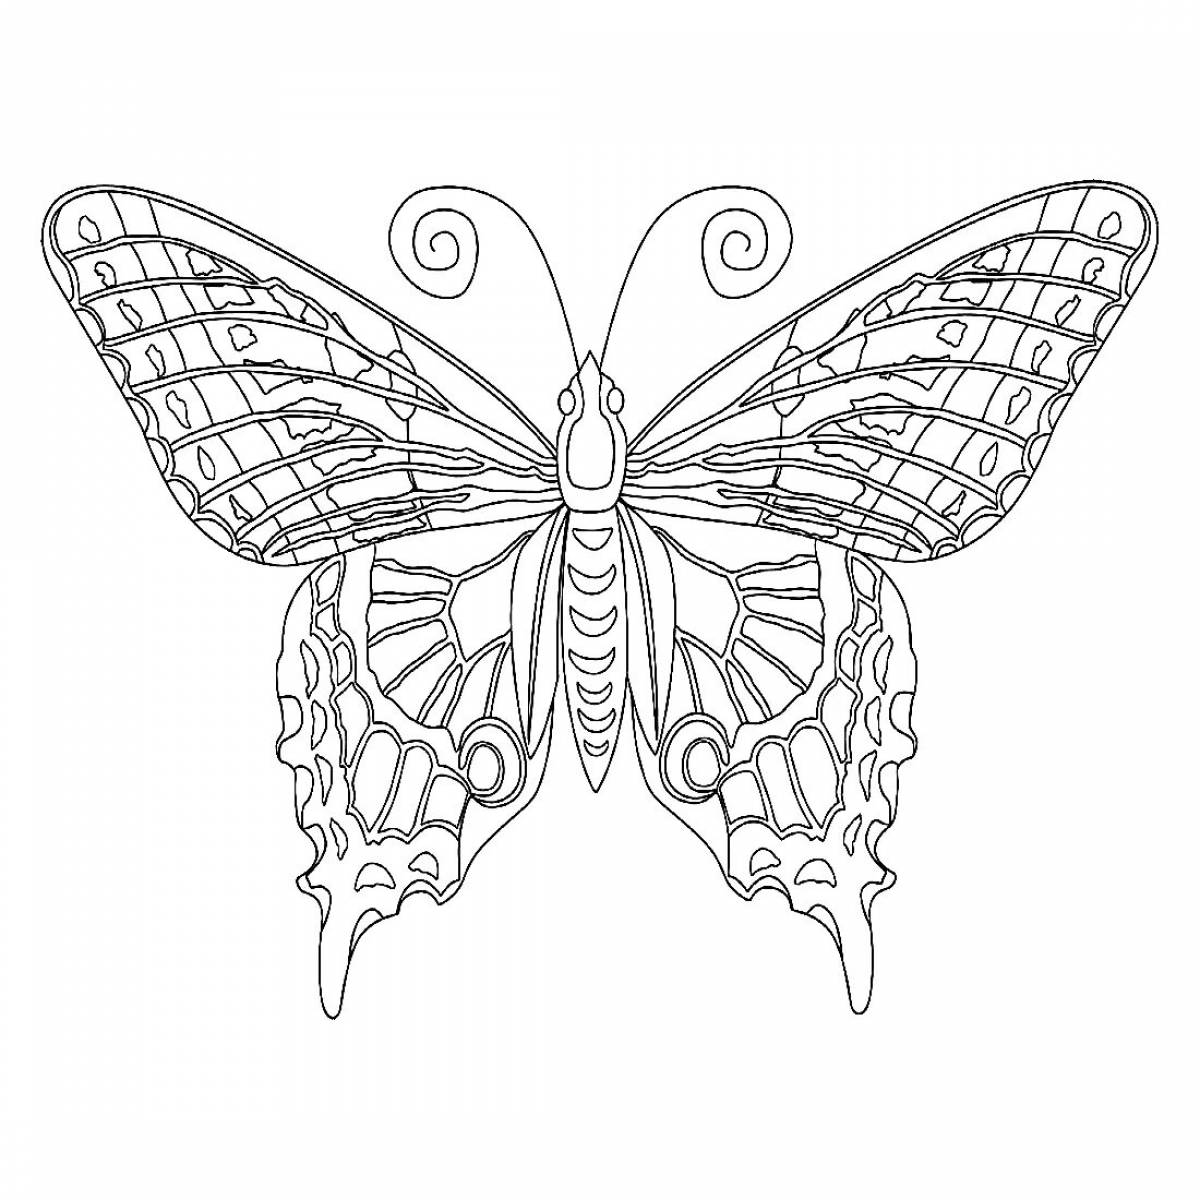 Great coloring of the butterfly complex